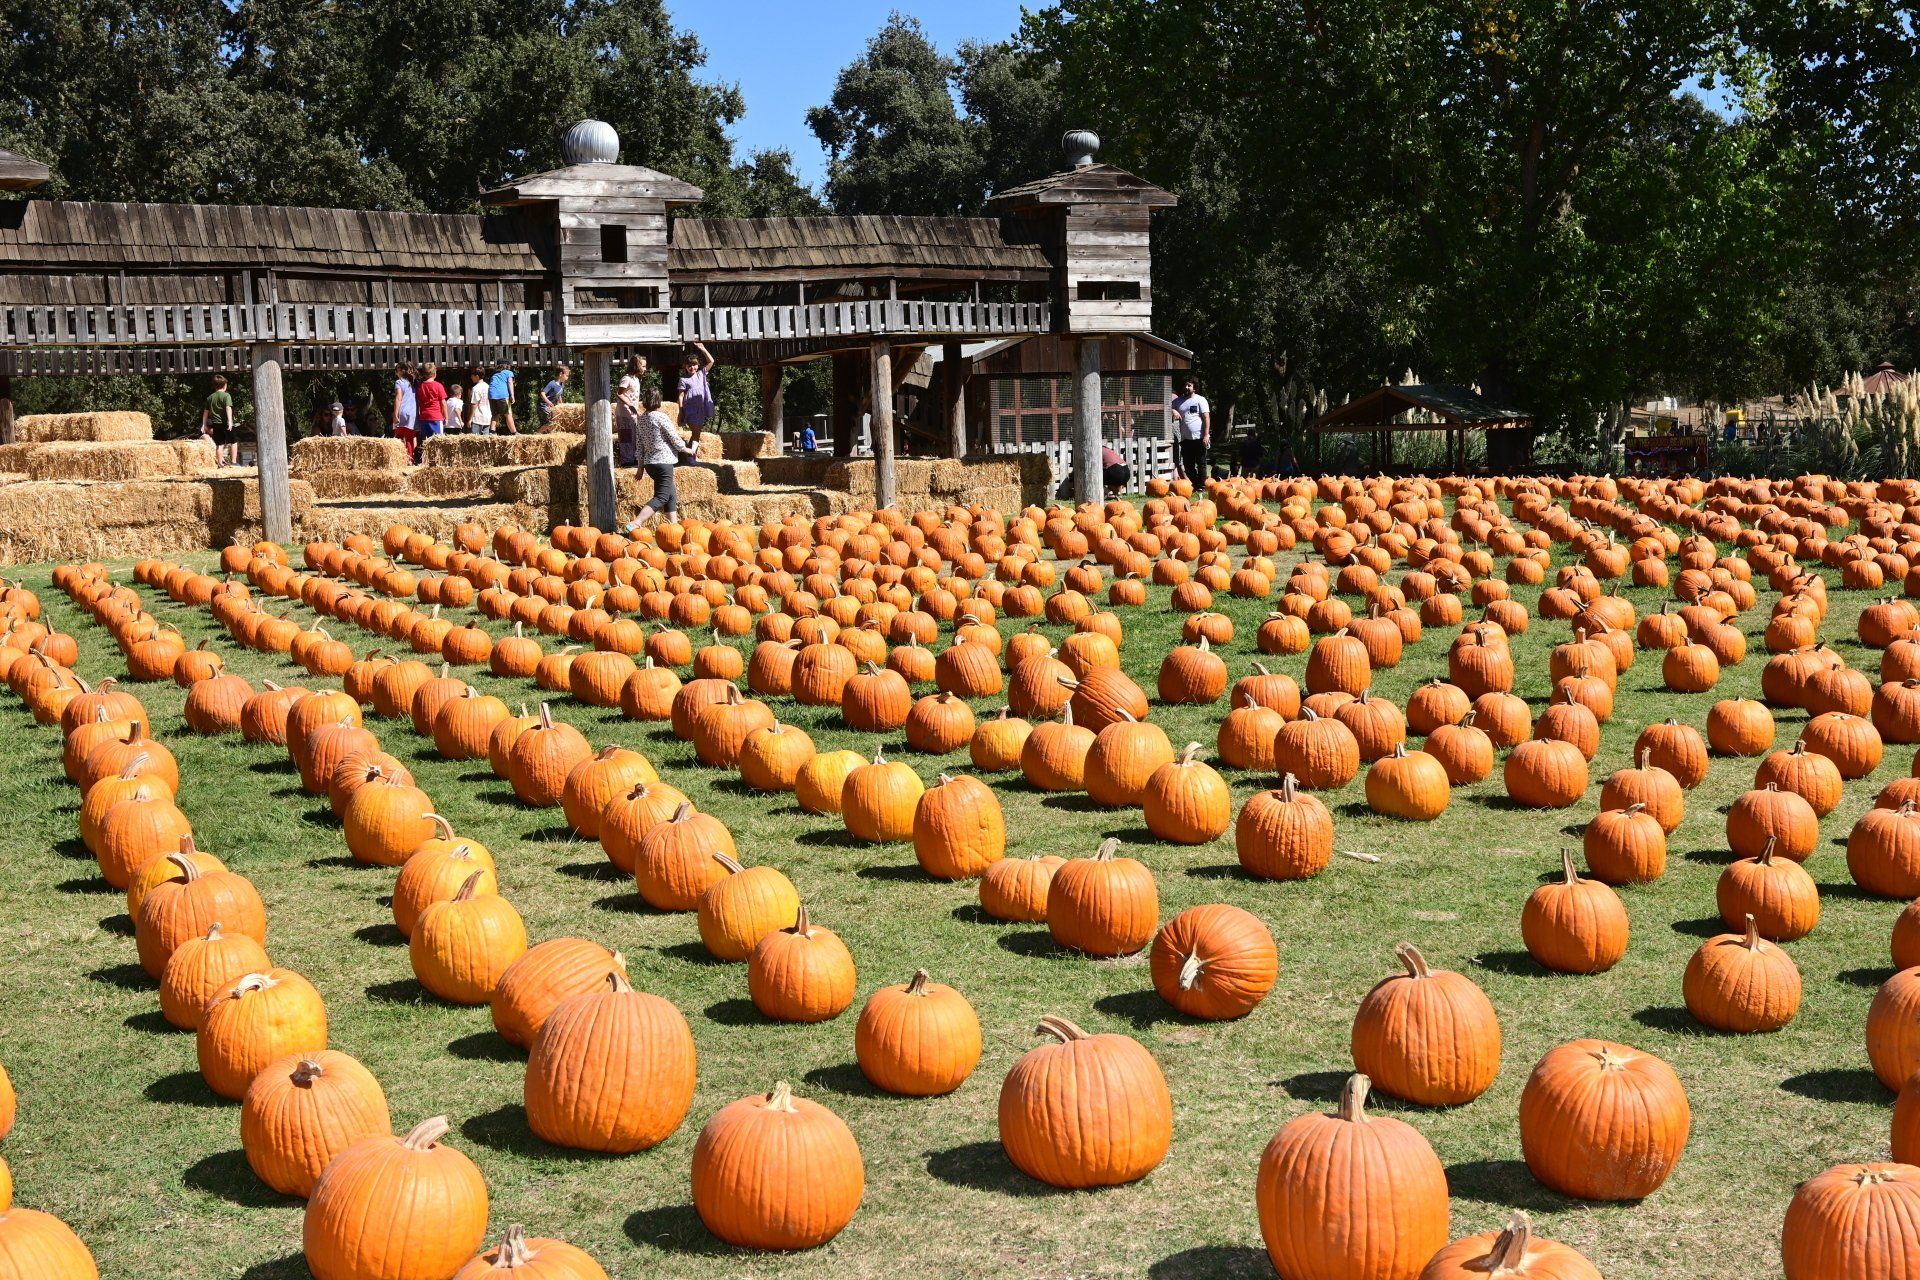 Here are the Best Pumpkin Patches in the Sacramento Area